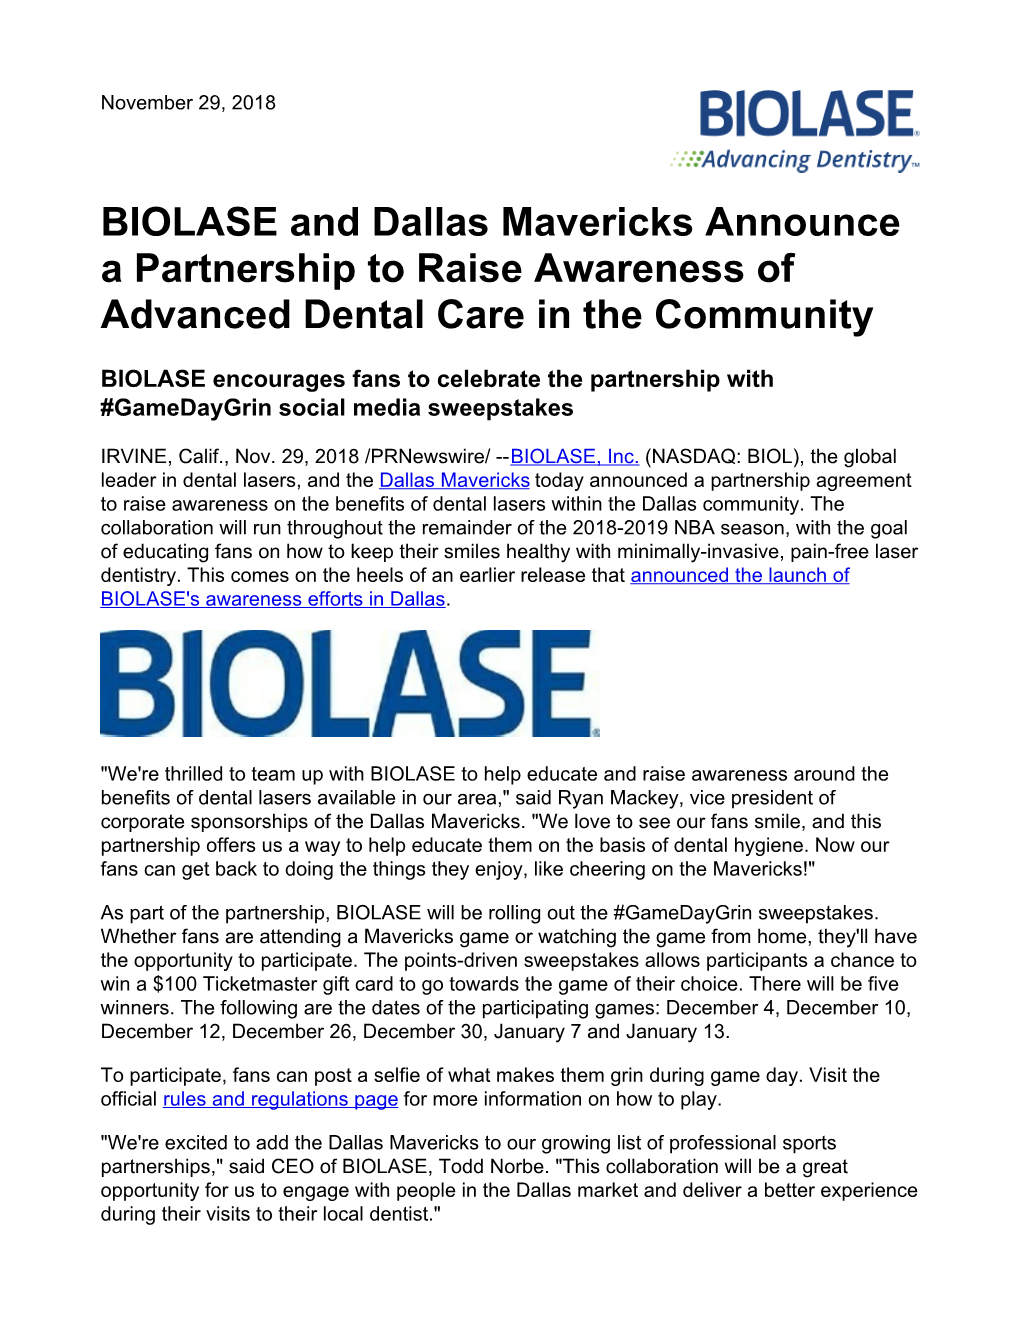 BIOLASE and Dallas Mavericks Announce a Partnership to Raise Awareness of Advanced Dental Care in the Community